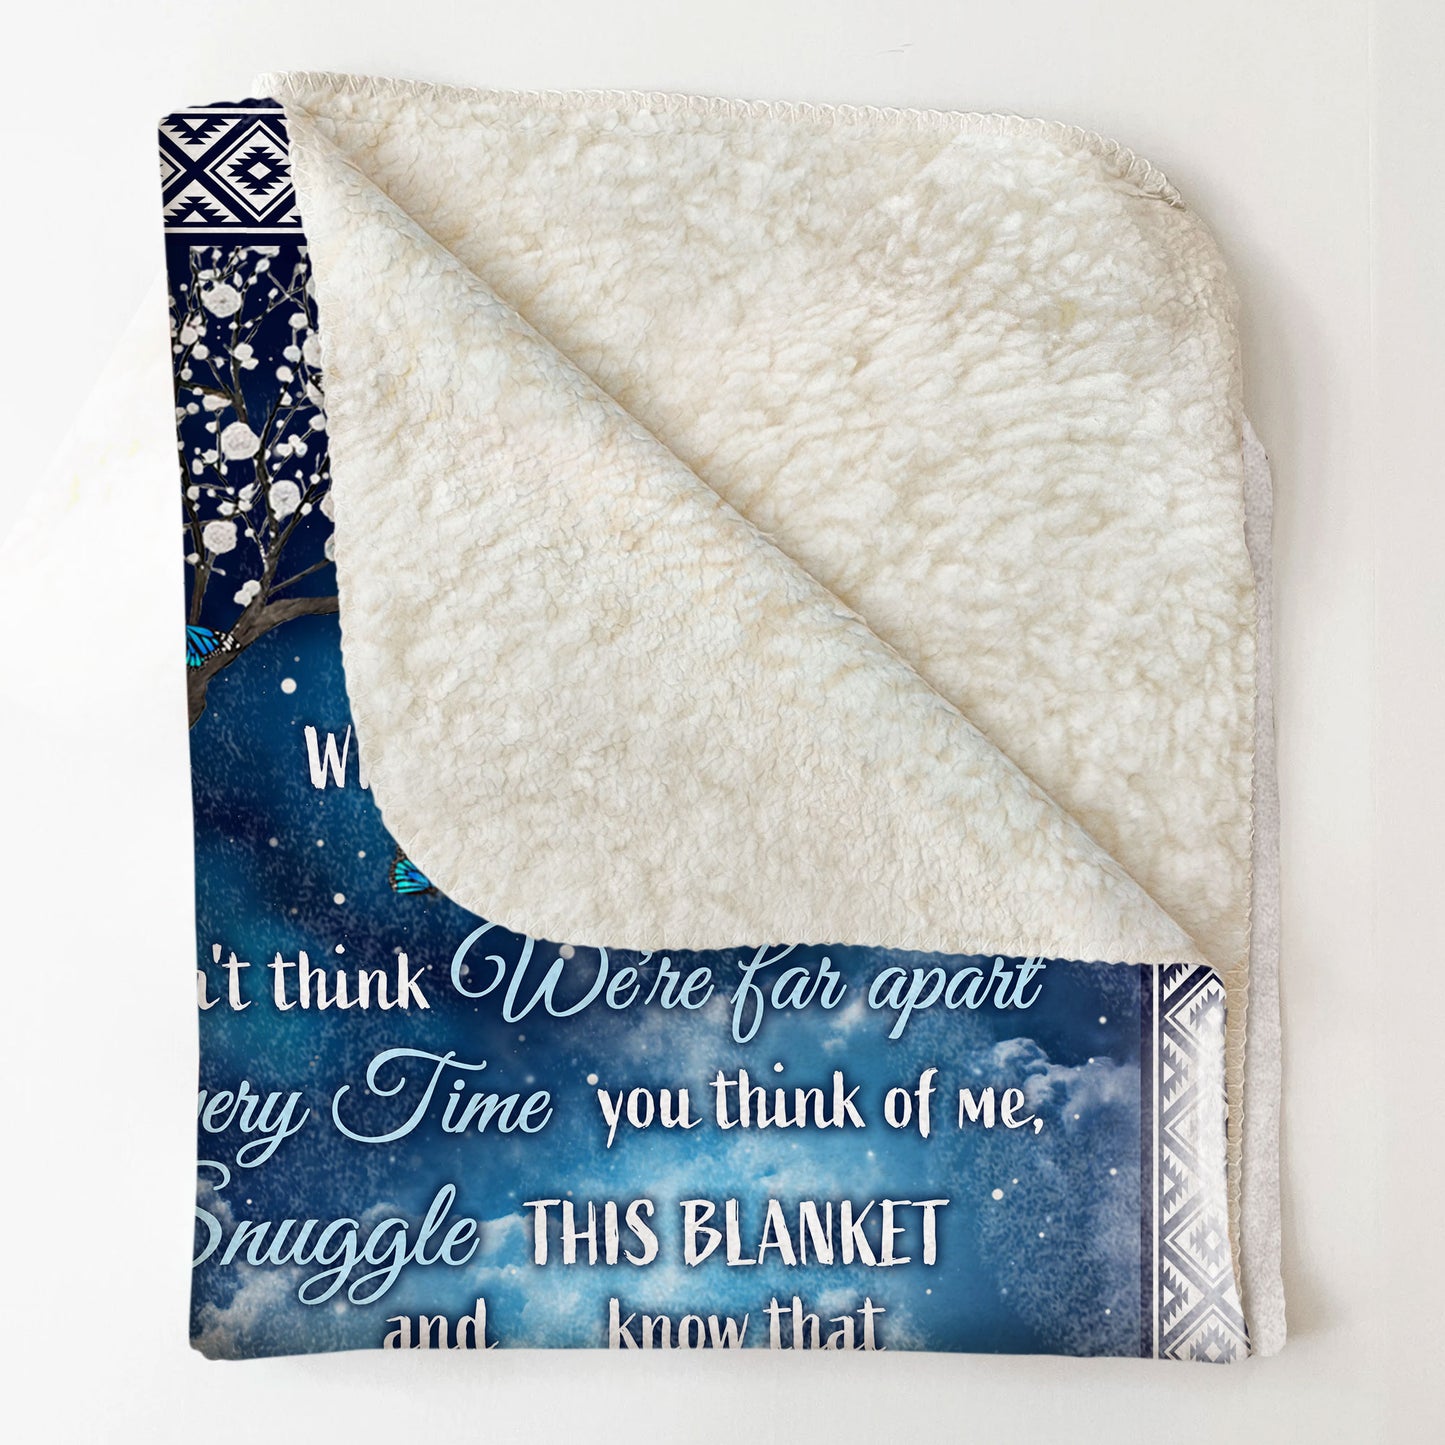 I'm Right Here In Your Heart - Personalized Blanket